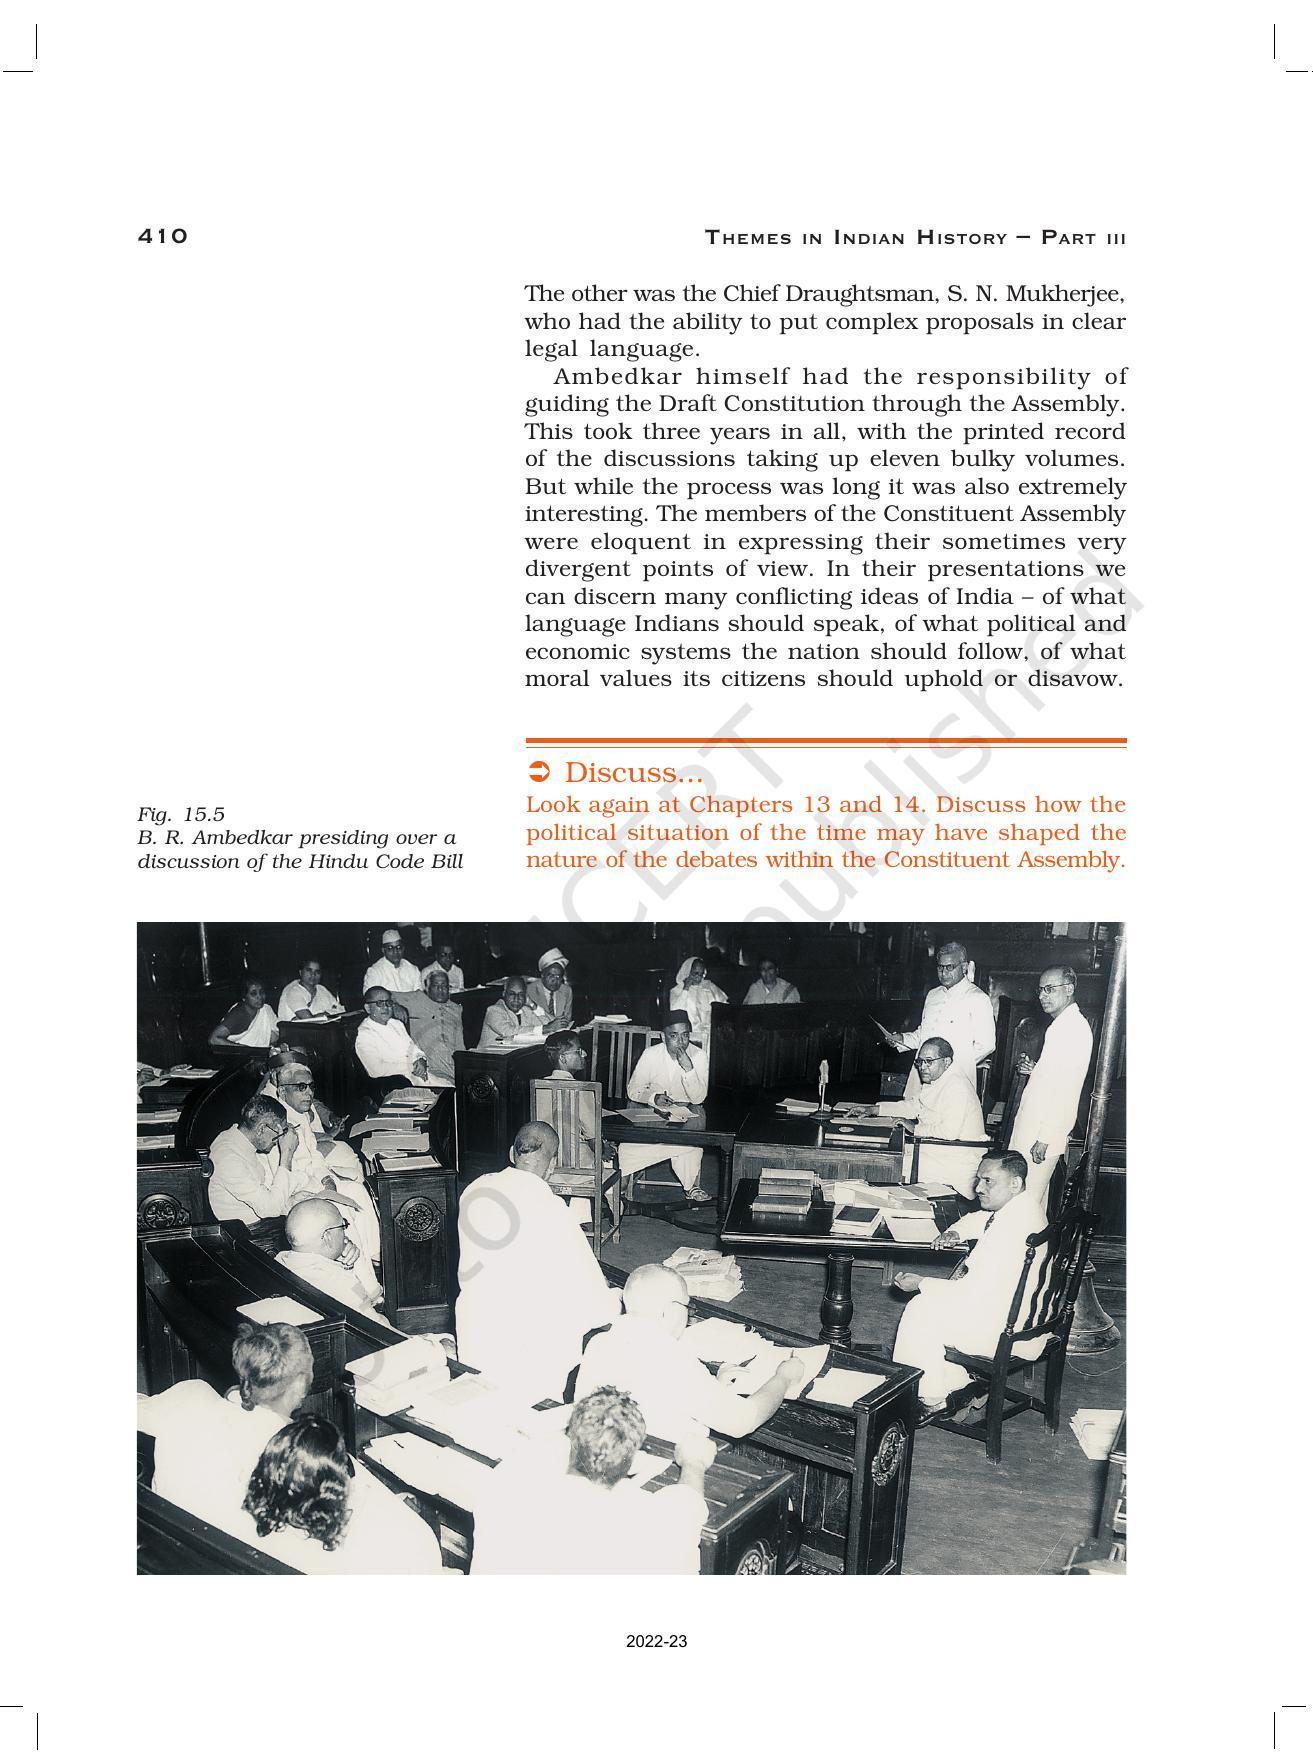 NCERT Book for Class 12 History (Part-III) Chapter 15 Framing and the Constitution - Page 6